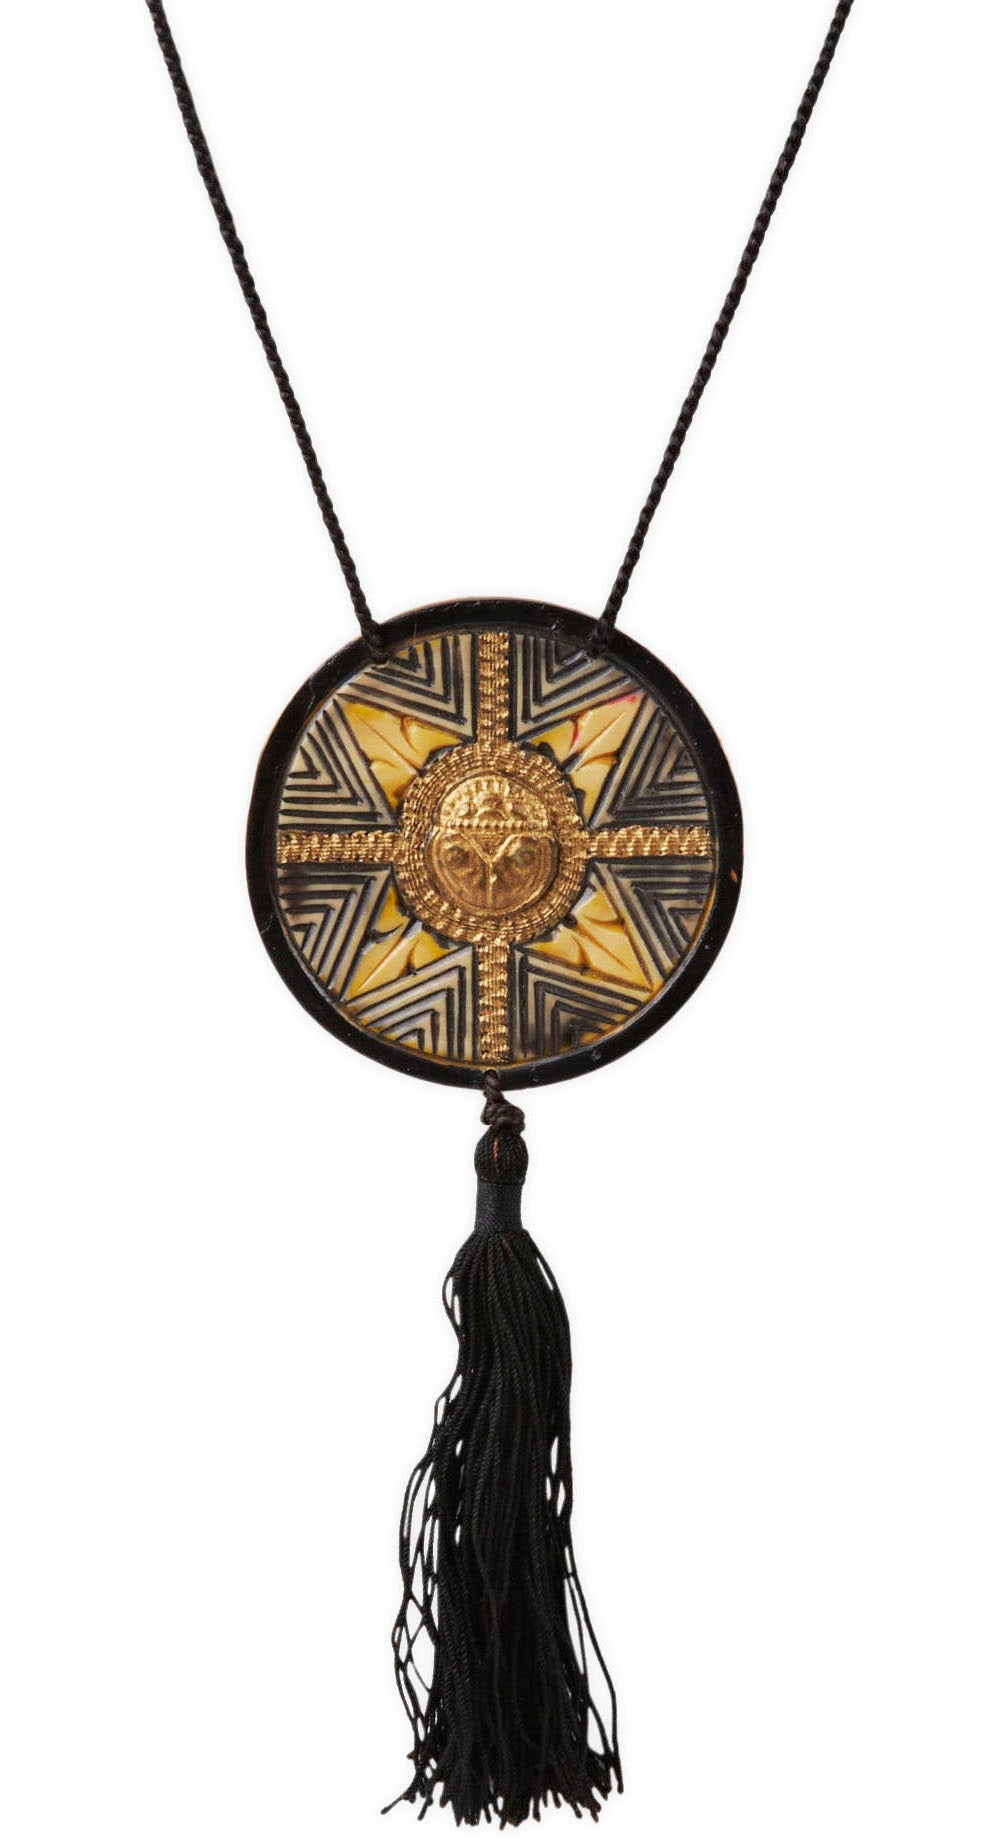 French Eygptian Revival Scarab Pendant in patinaed and painted celluloid on silk cord with tassel. Pendant 2.4